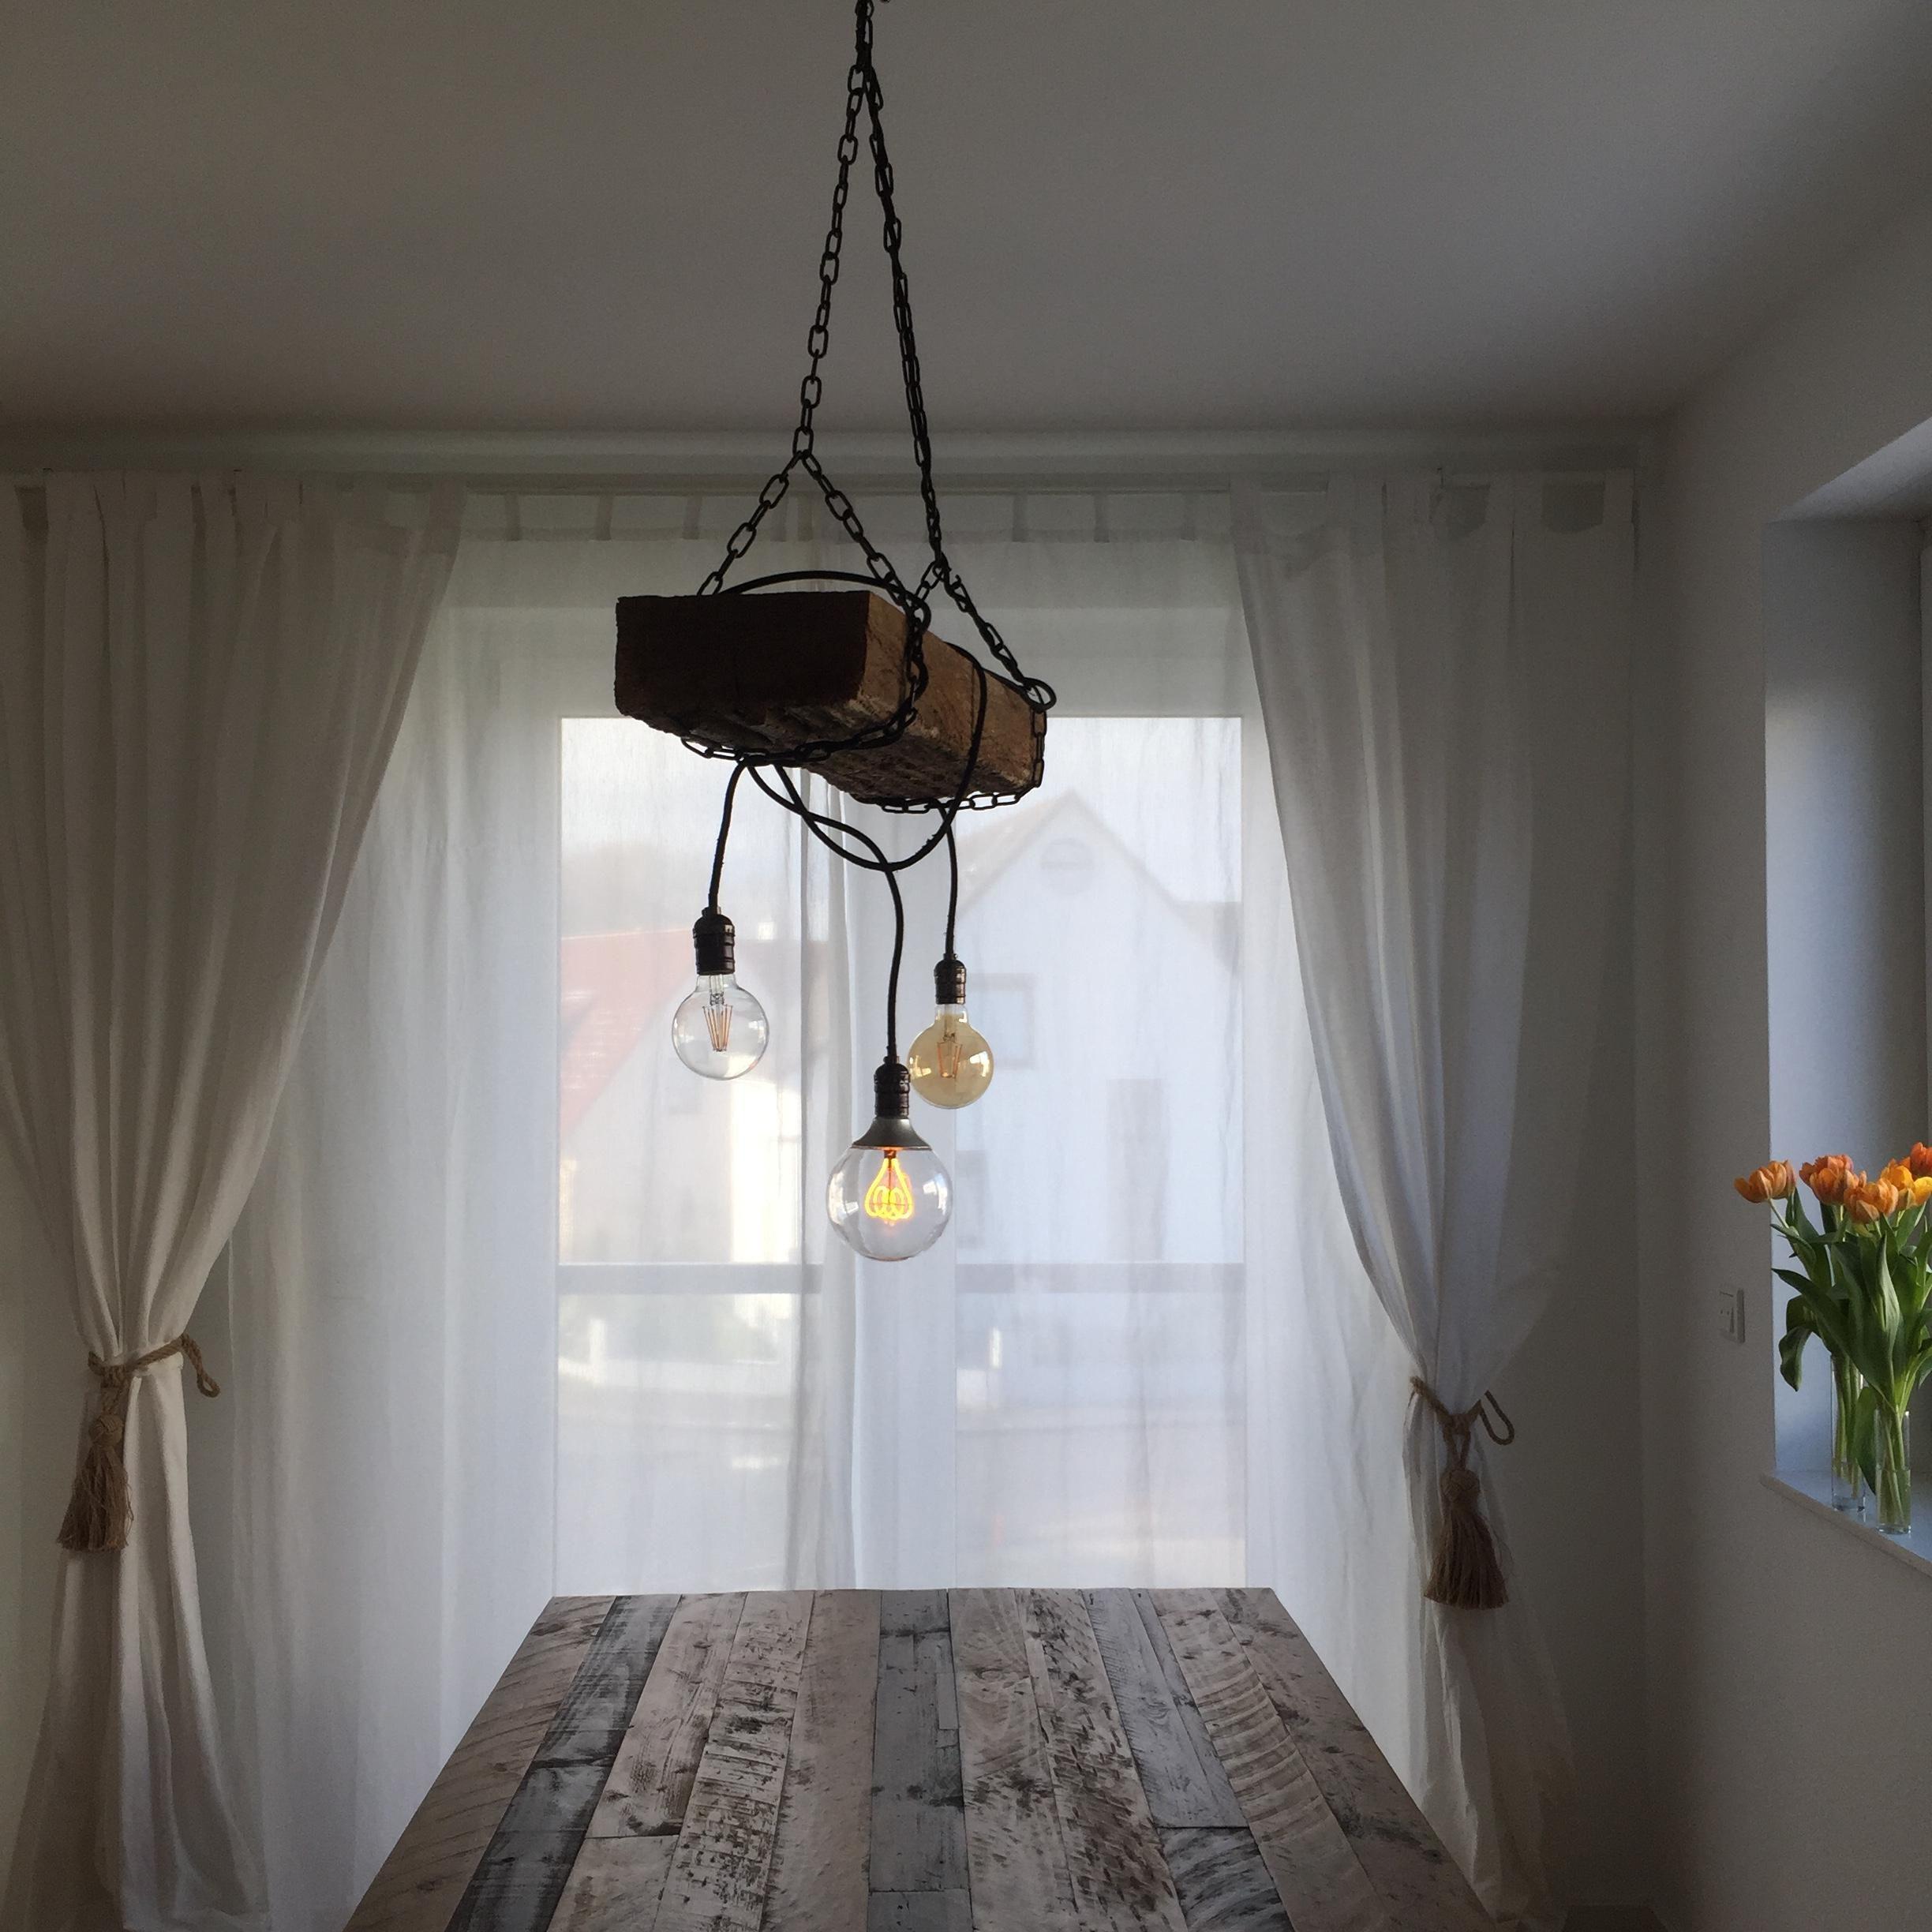 Absolut neues Lieblings #DIY: unsere neue Holz-Lampe 
#diyweek #kitchenstyle #upcycling